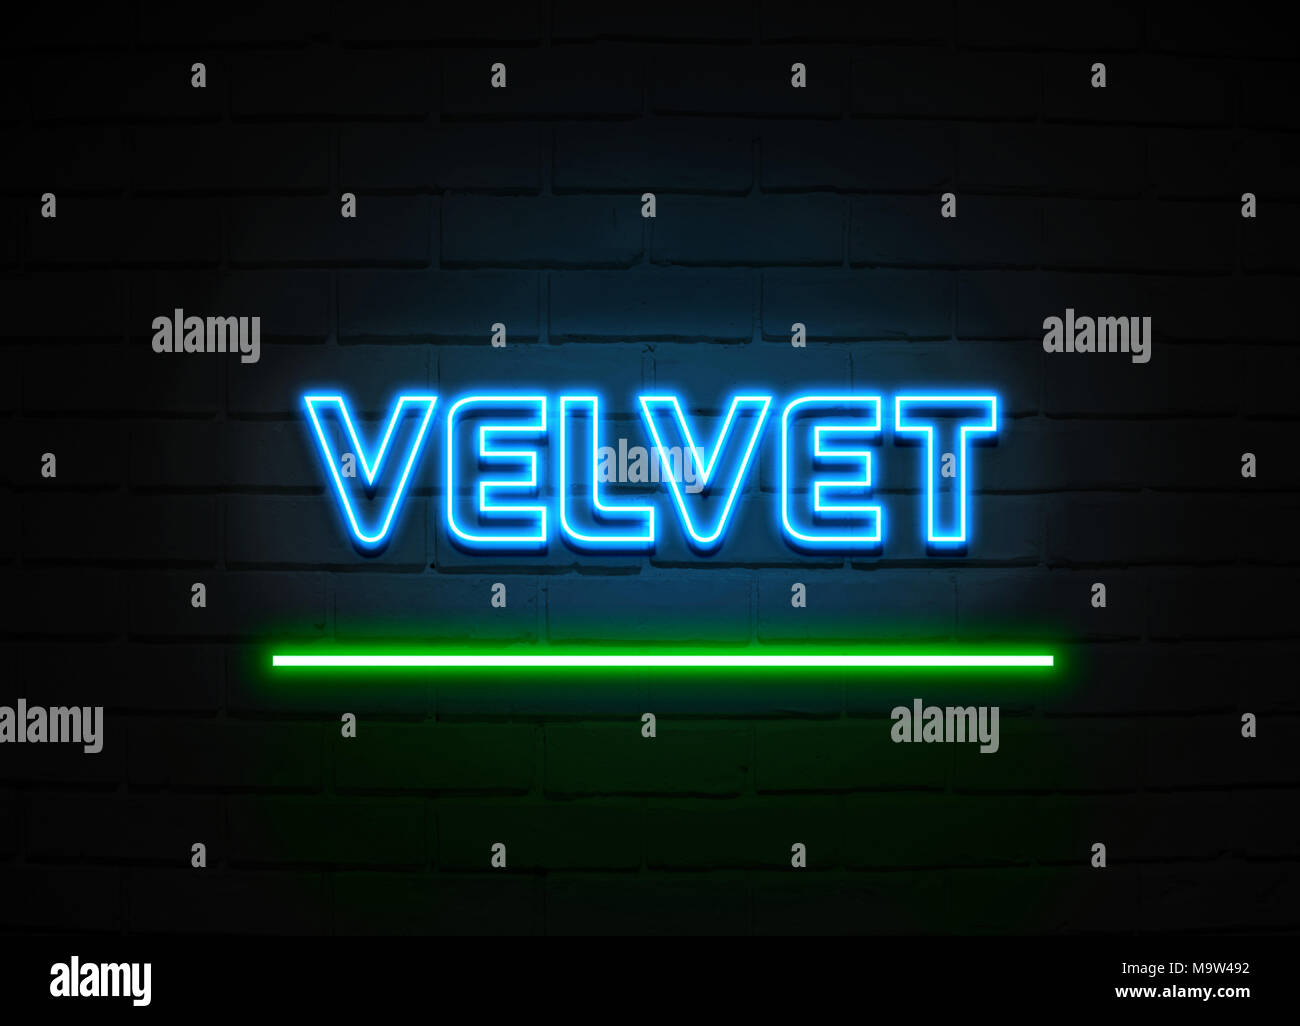 Velvet neon sign - Glowing Neon Sign on brickwall wall - 3D rendered royalty free stock illustration. Stock Photo